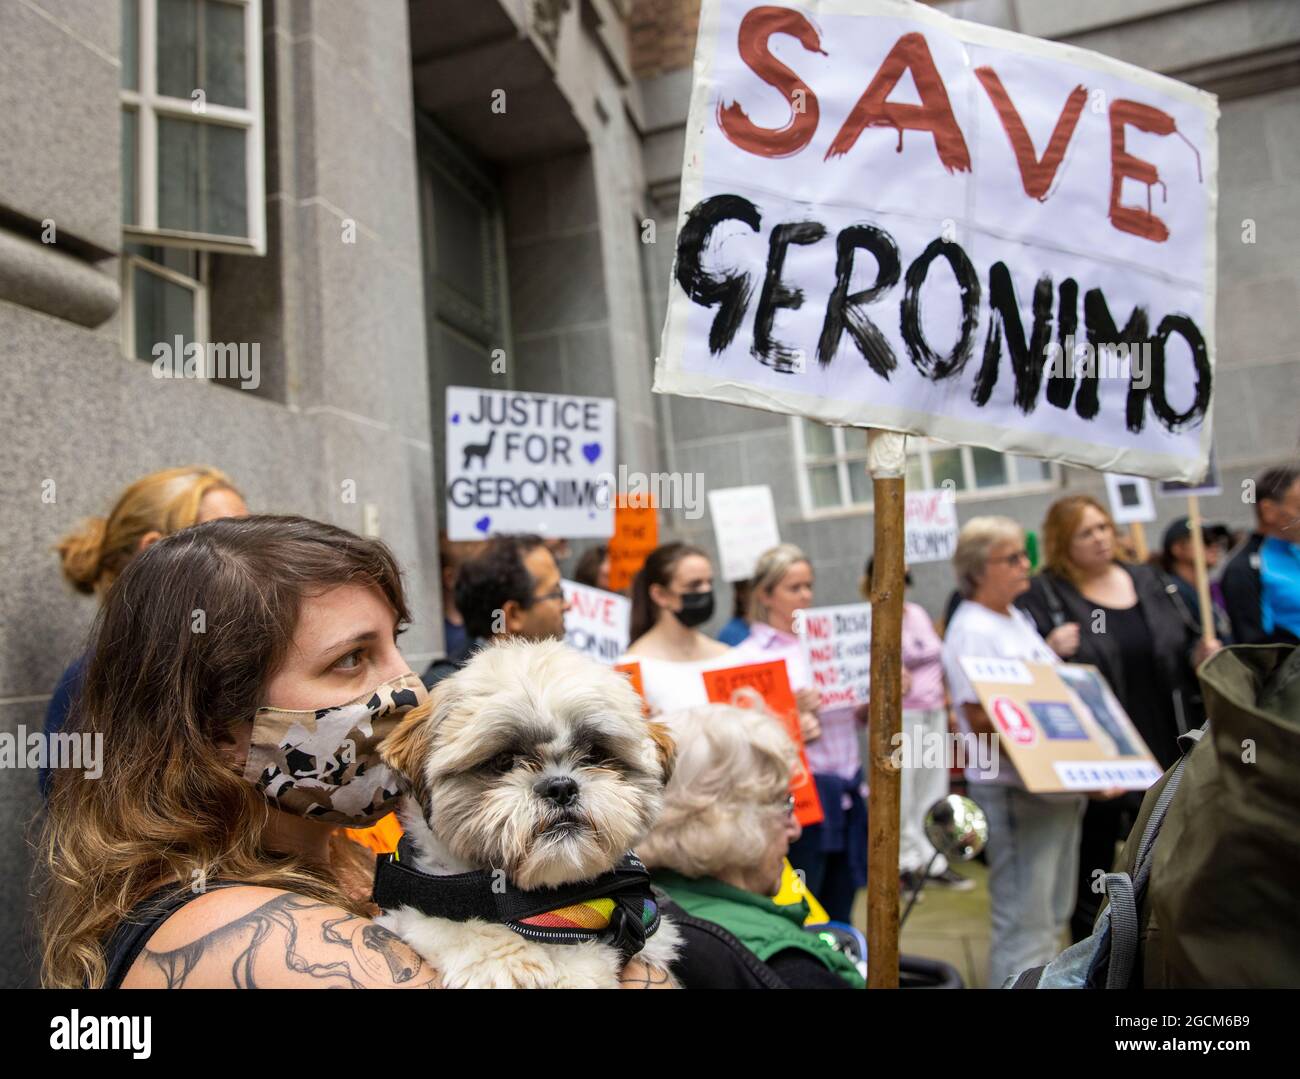 London, UK 9 Aug 2021 Protestors gather outside DEFRA before marching on to Downing Street. They are calling on the Environment Secretary, George Eustice, to consider a retest for the Alpaca named Geronimo. They are asking that Geronimo be retested as the current test is not accurate. Geronimo has twice tested positive for bovine tuberculosis, and the Department of Food, Environment and Rural Affairs has ordered he be euthanised. Credit: Mark Thomas/Alamy Live News Stock Photo